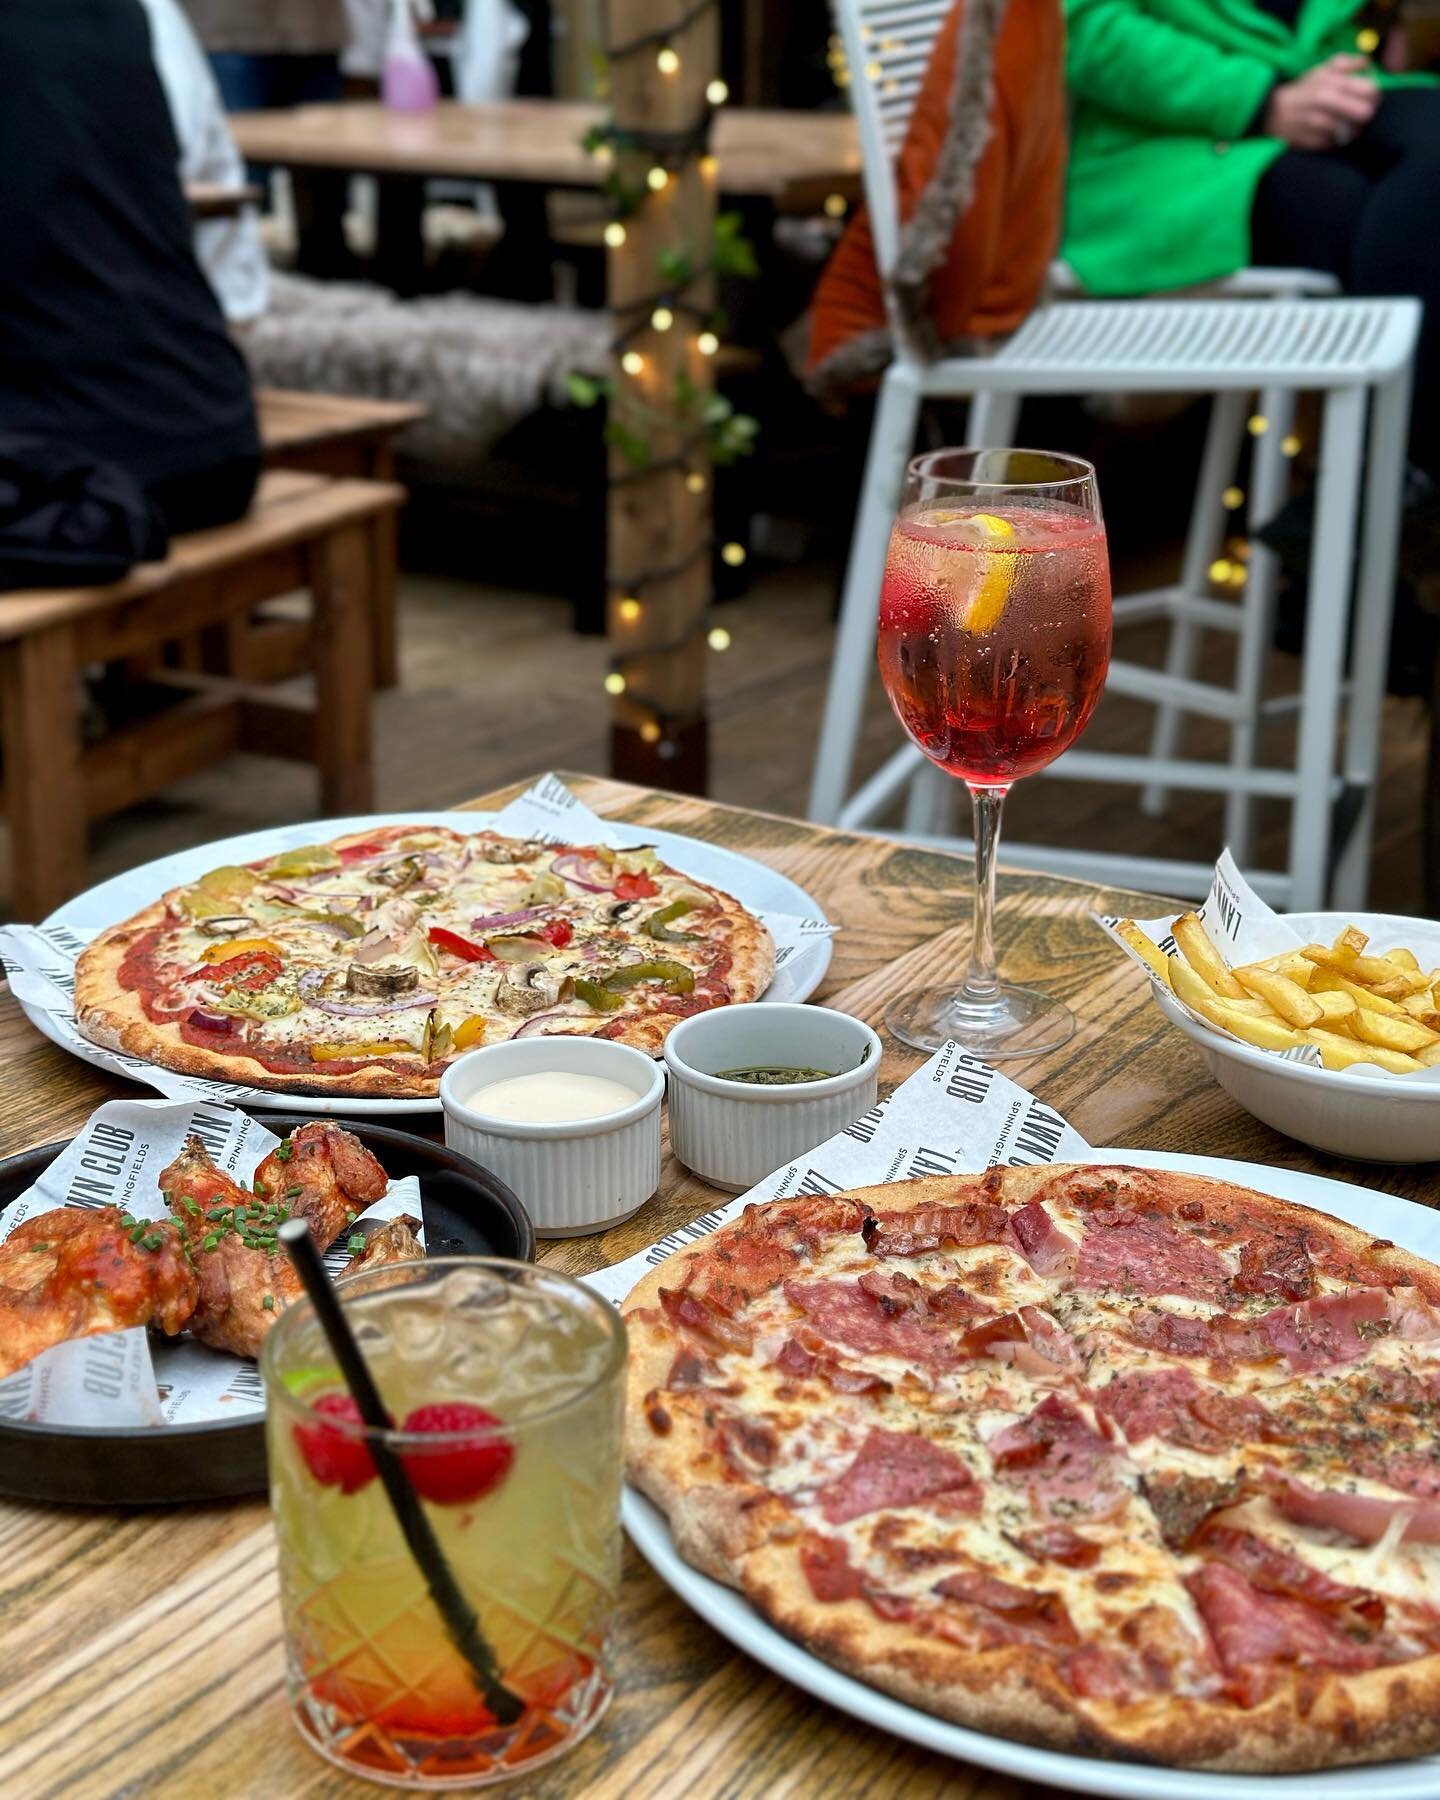 It's brunch o'clock! 🍹🍕

Treat yourself to our Bottomless Brunch featuring a delicious main and side dish, with your choice of unlimited Pimm's Sundowner Spritz, Mimosa, Prosecco, or Birra Moretti. 

Take your taste buds on a journey with our famou